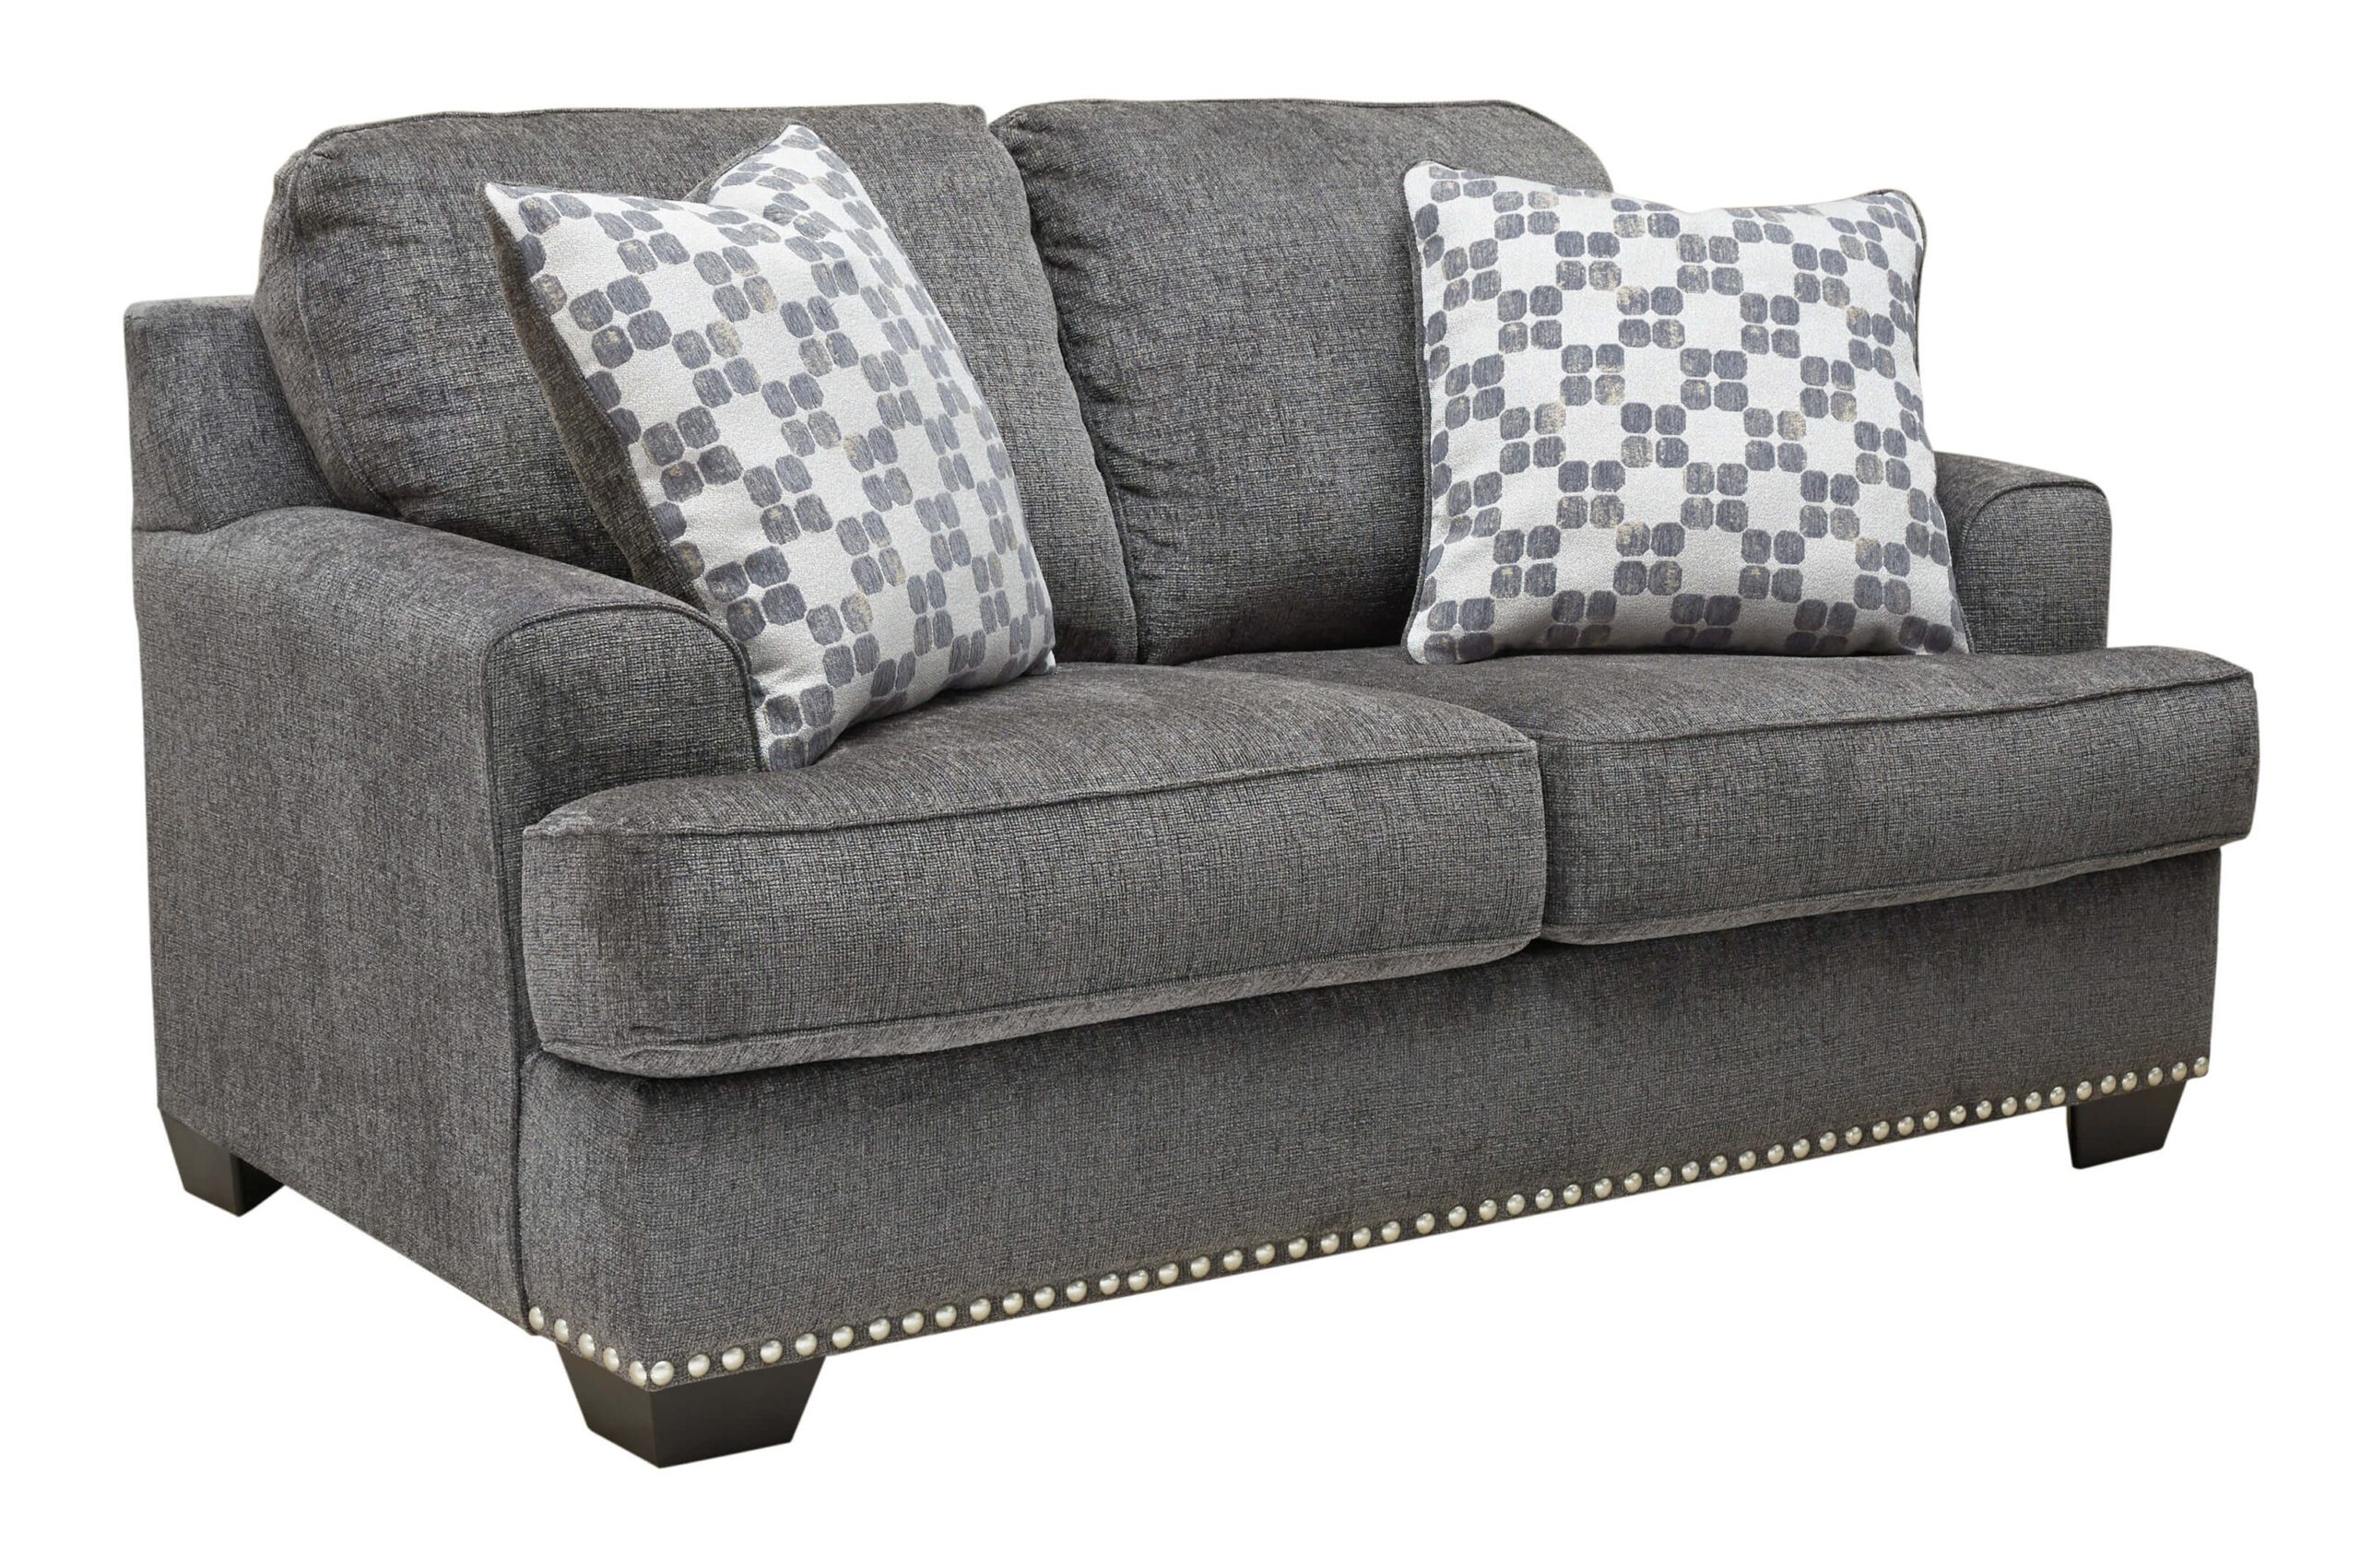 Ashley Locklin Carbon Loveseat By Ashley no background product image